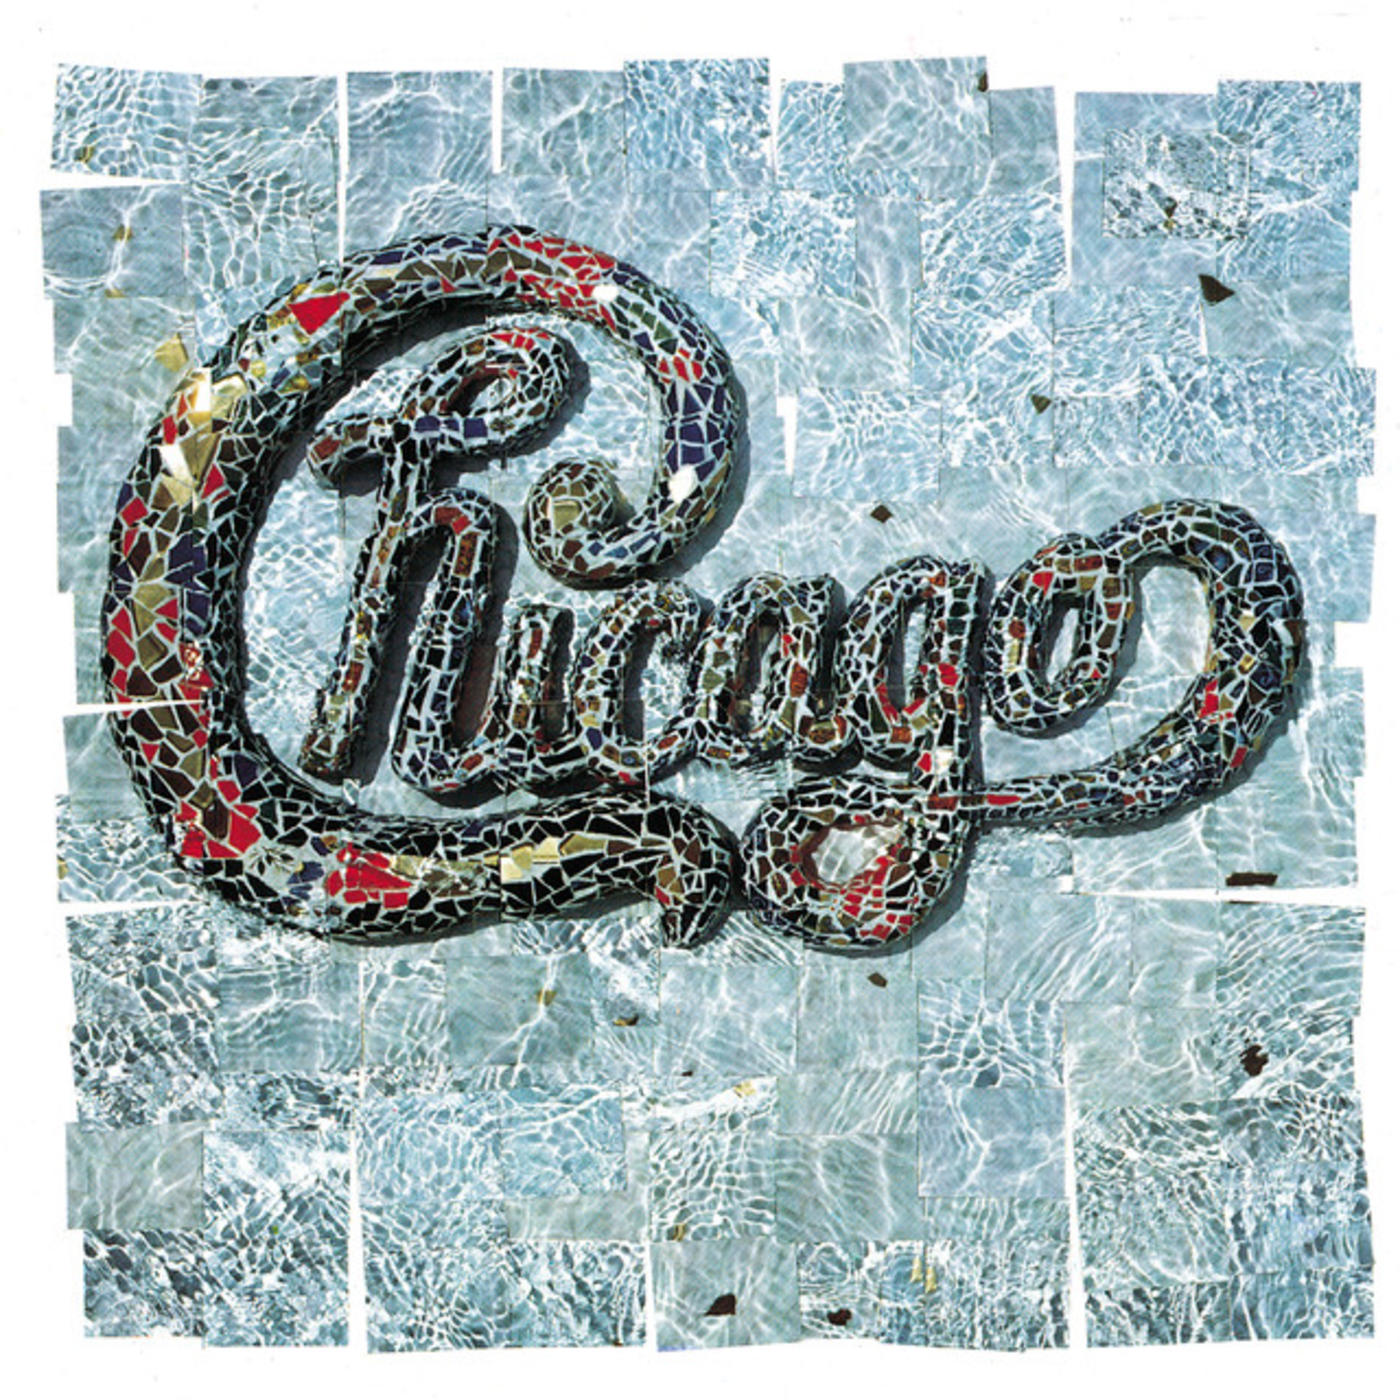 Chicago 18 (Expanded Edition)